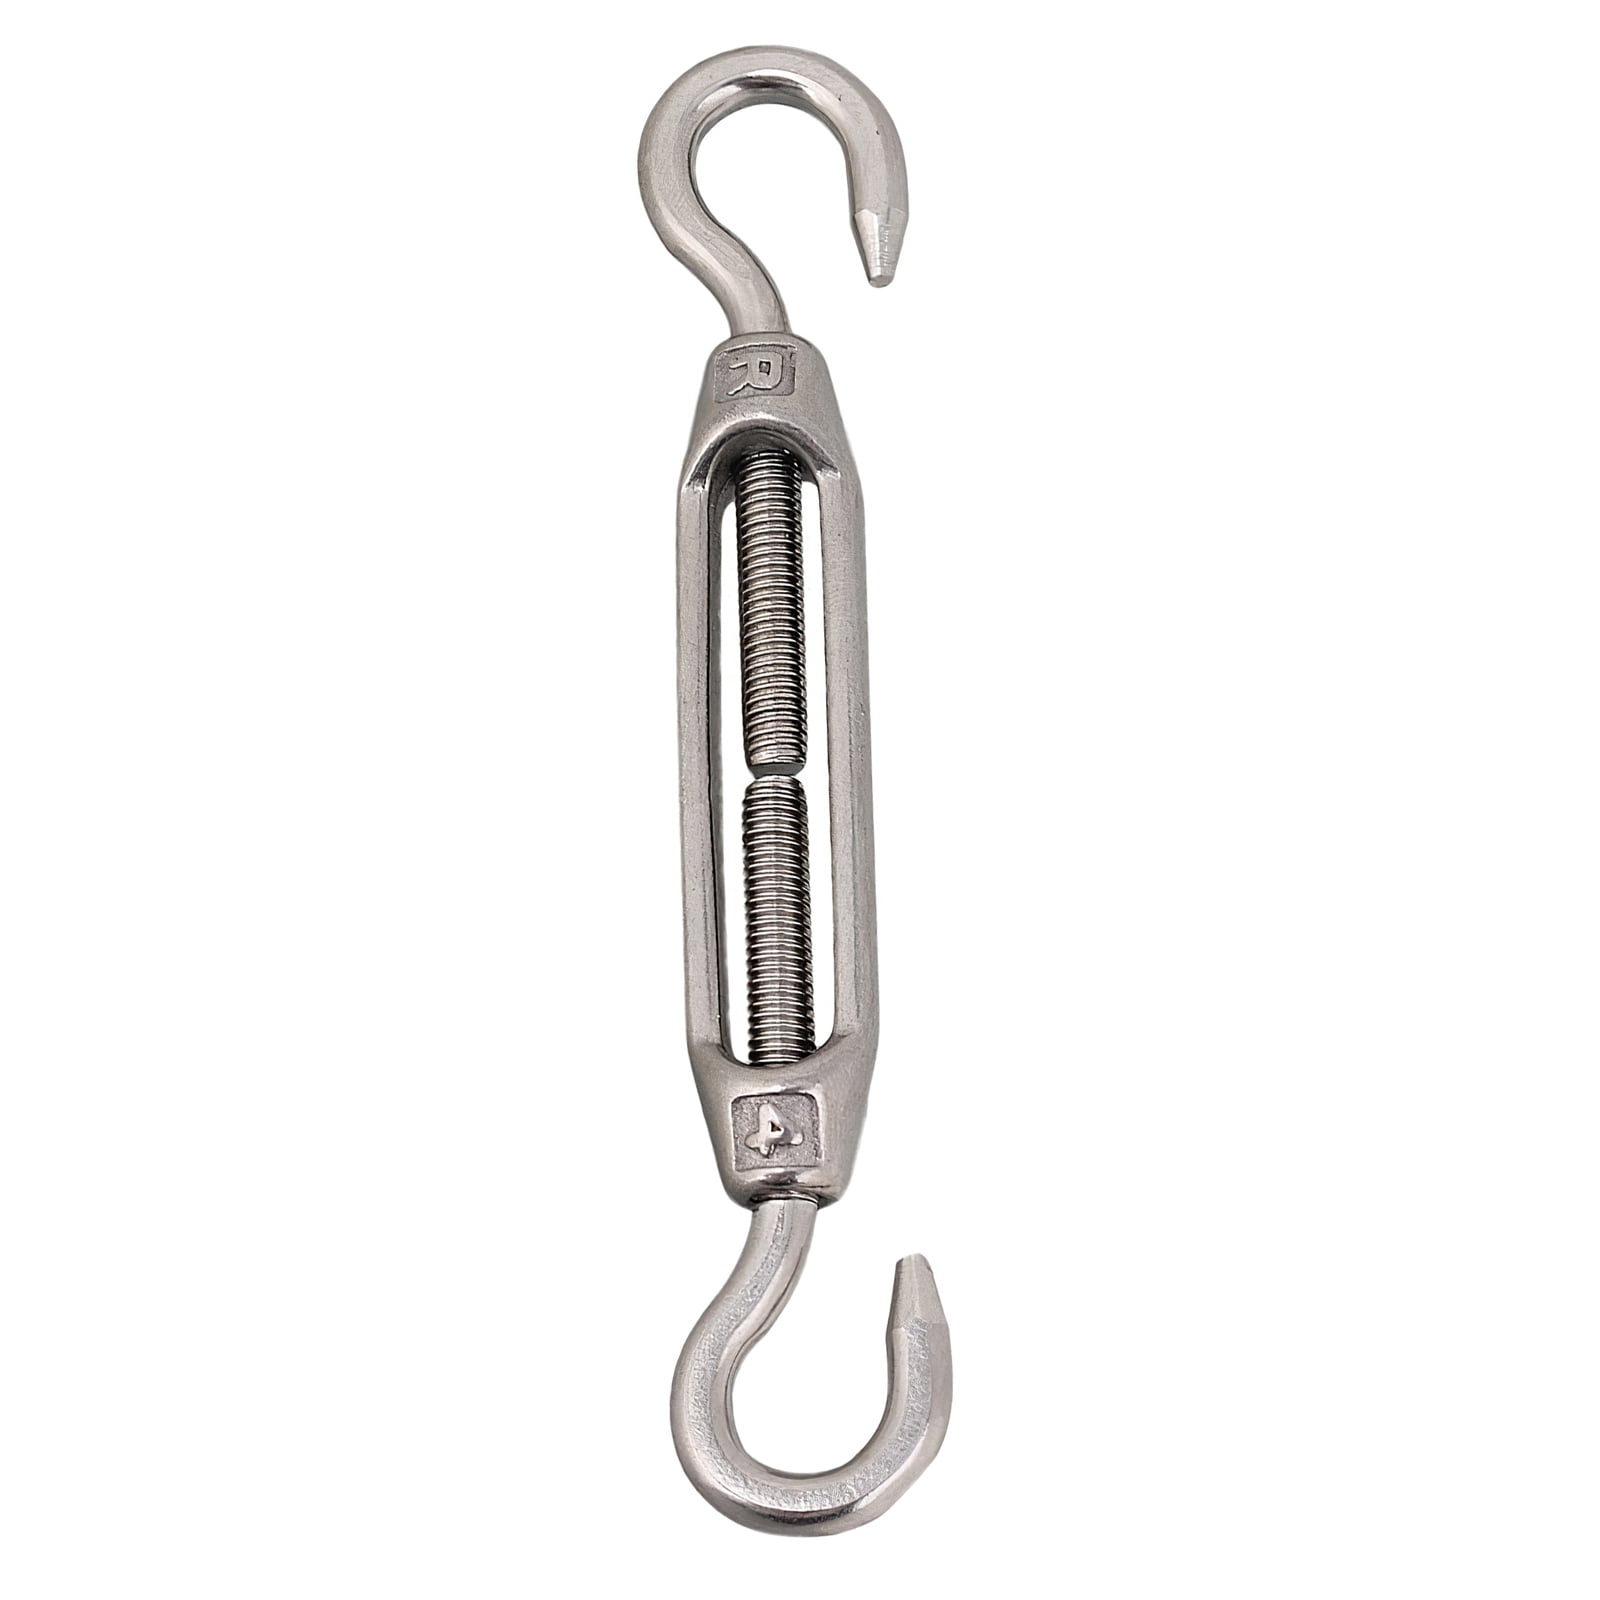 Details about   1 Bag 50pcs Heavy Duty S-hooks Stainless Steel Wire Metal Secured S Hook Hangers 